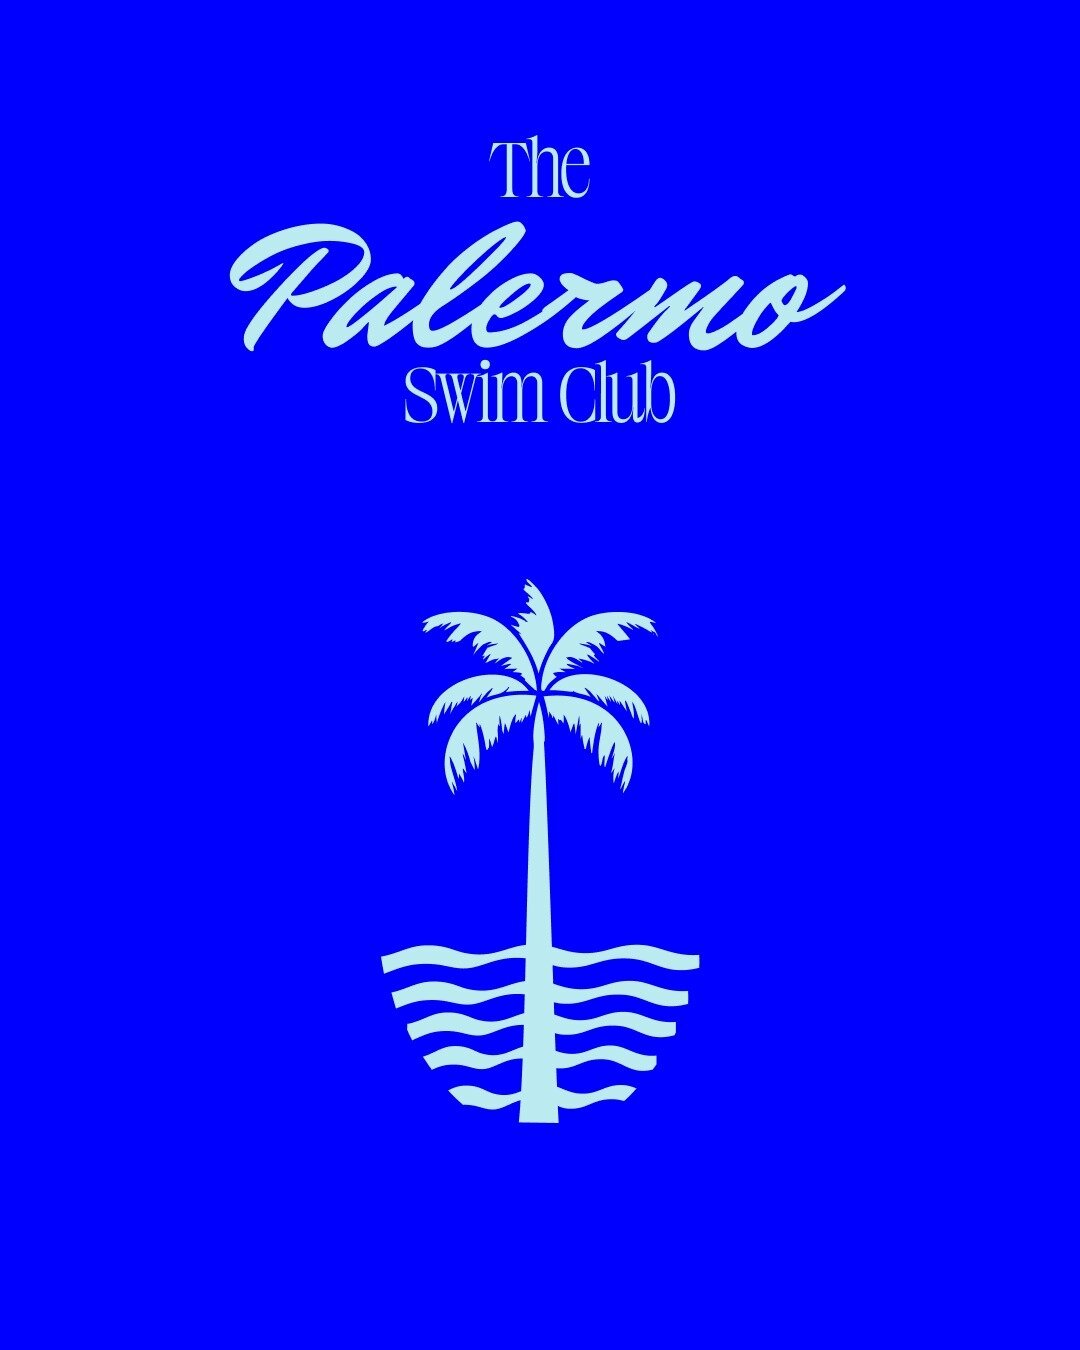 The Palermo Swim Club is home to Las Sirenas, the most enchanting synchronized swim team in the Atlantic. Practice your laps or take a relaxing dip by our rooftop pool. Imbibe with one of our signature juices, or enjoy a bite at our cafe, serving a f